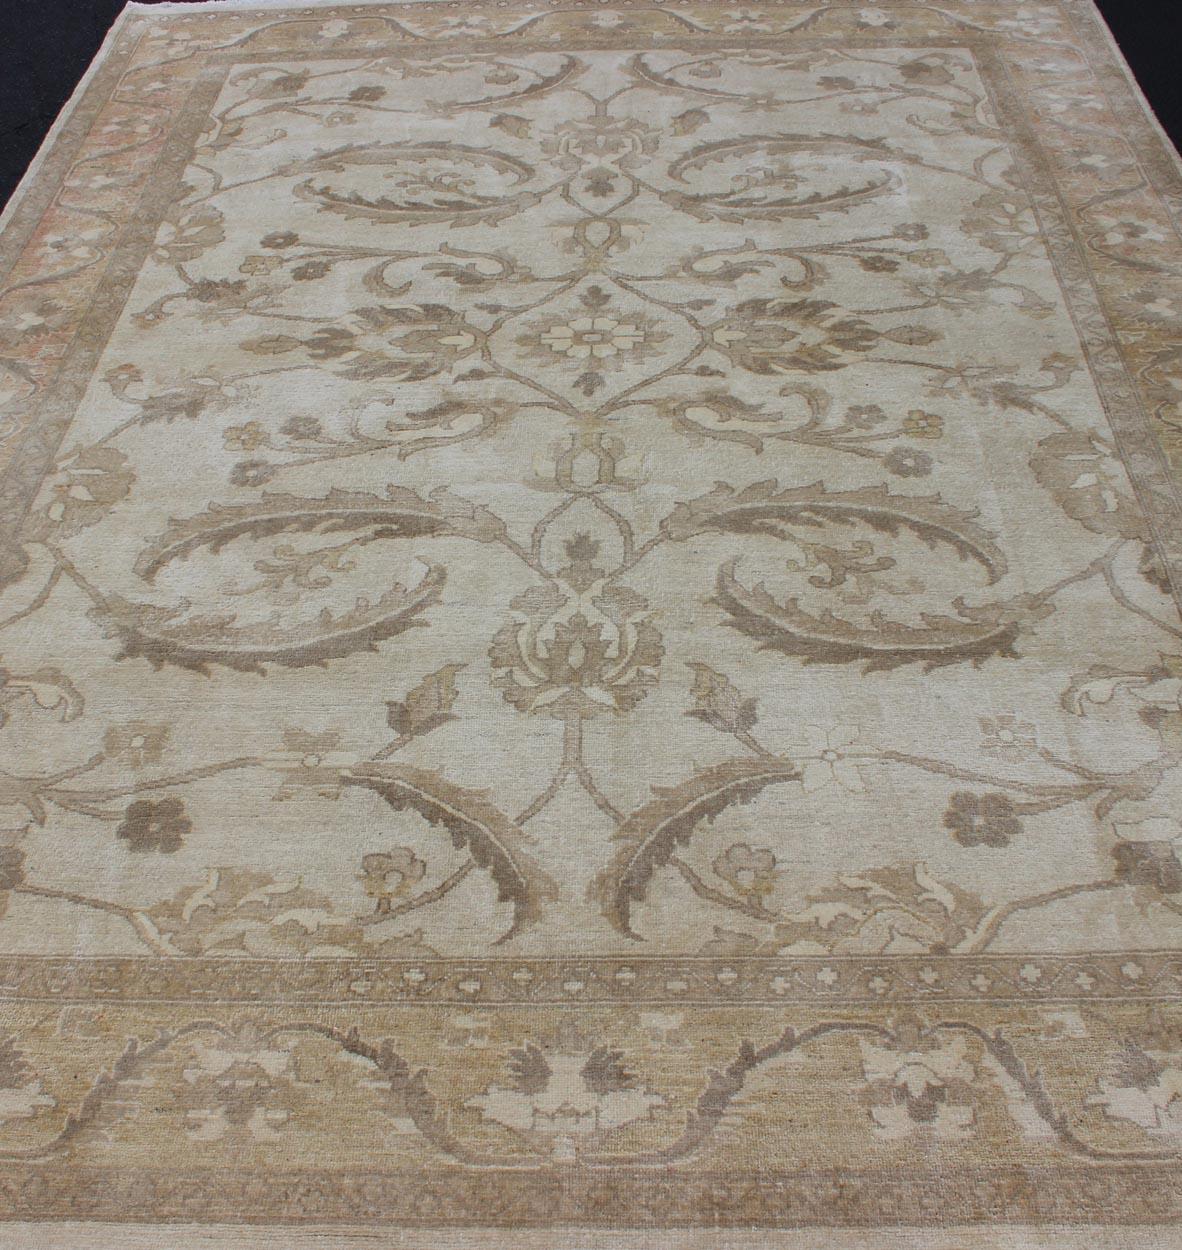 Sultanabad Design Modern Rug in Muted Tones In Good Condition For Sale In Atlanta, GA